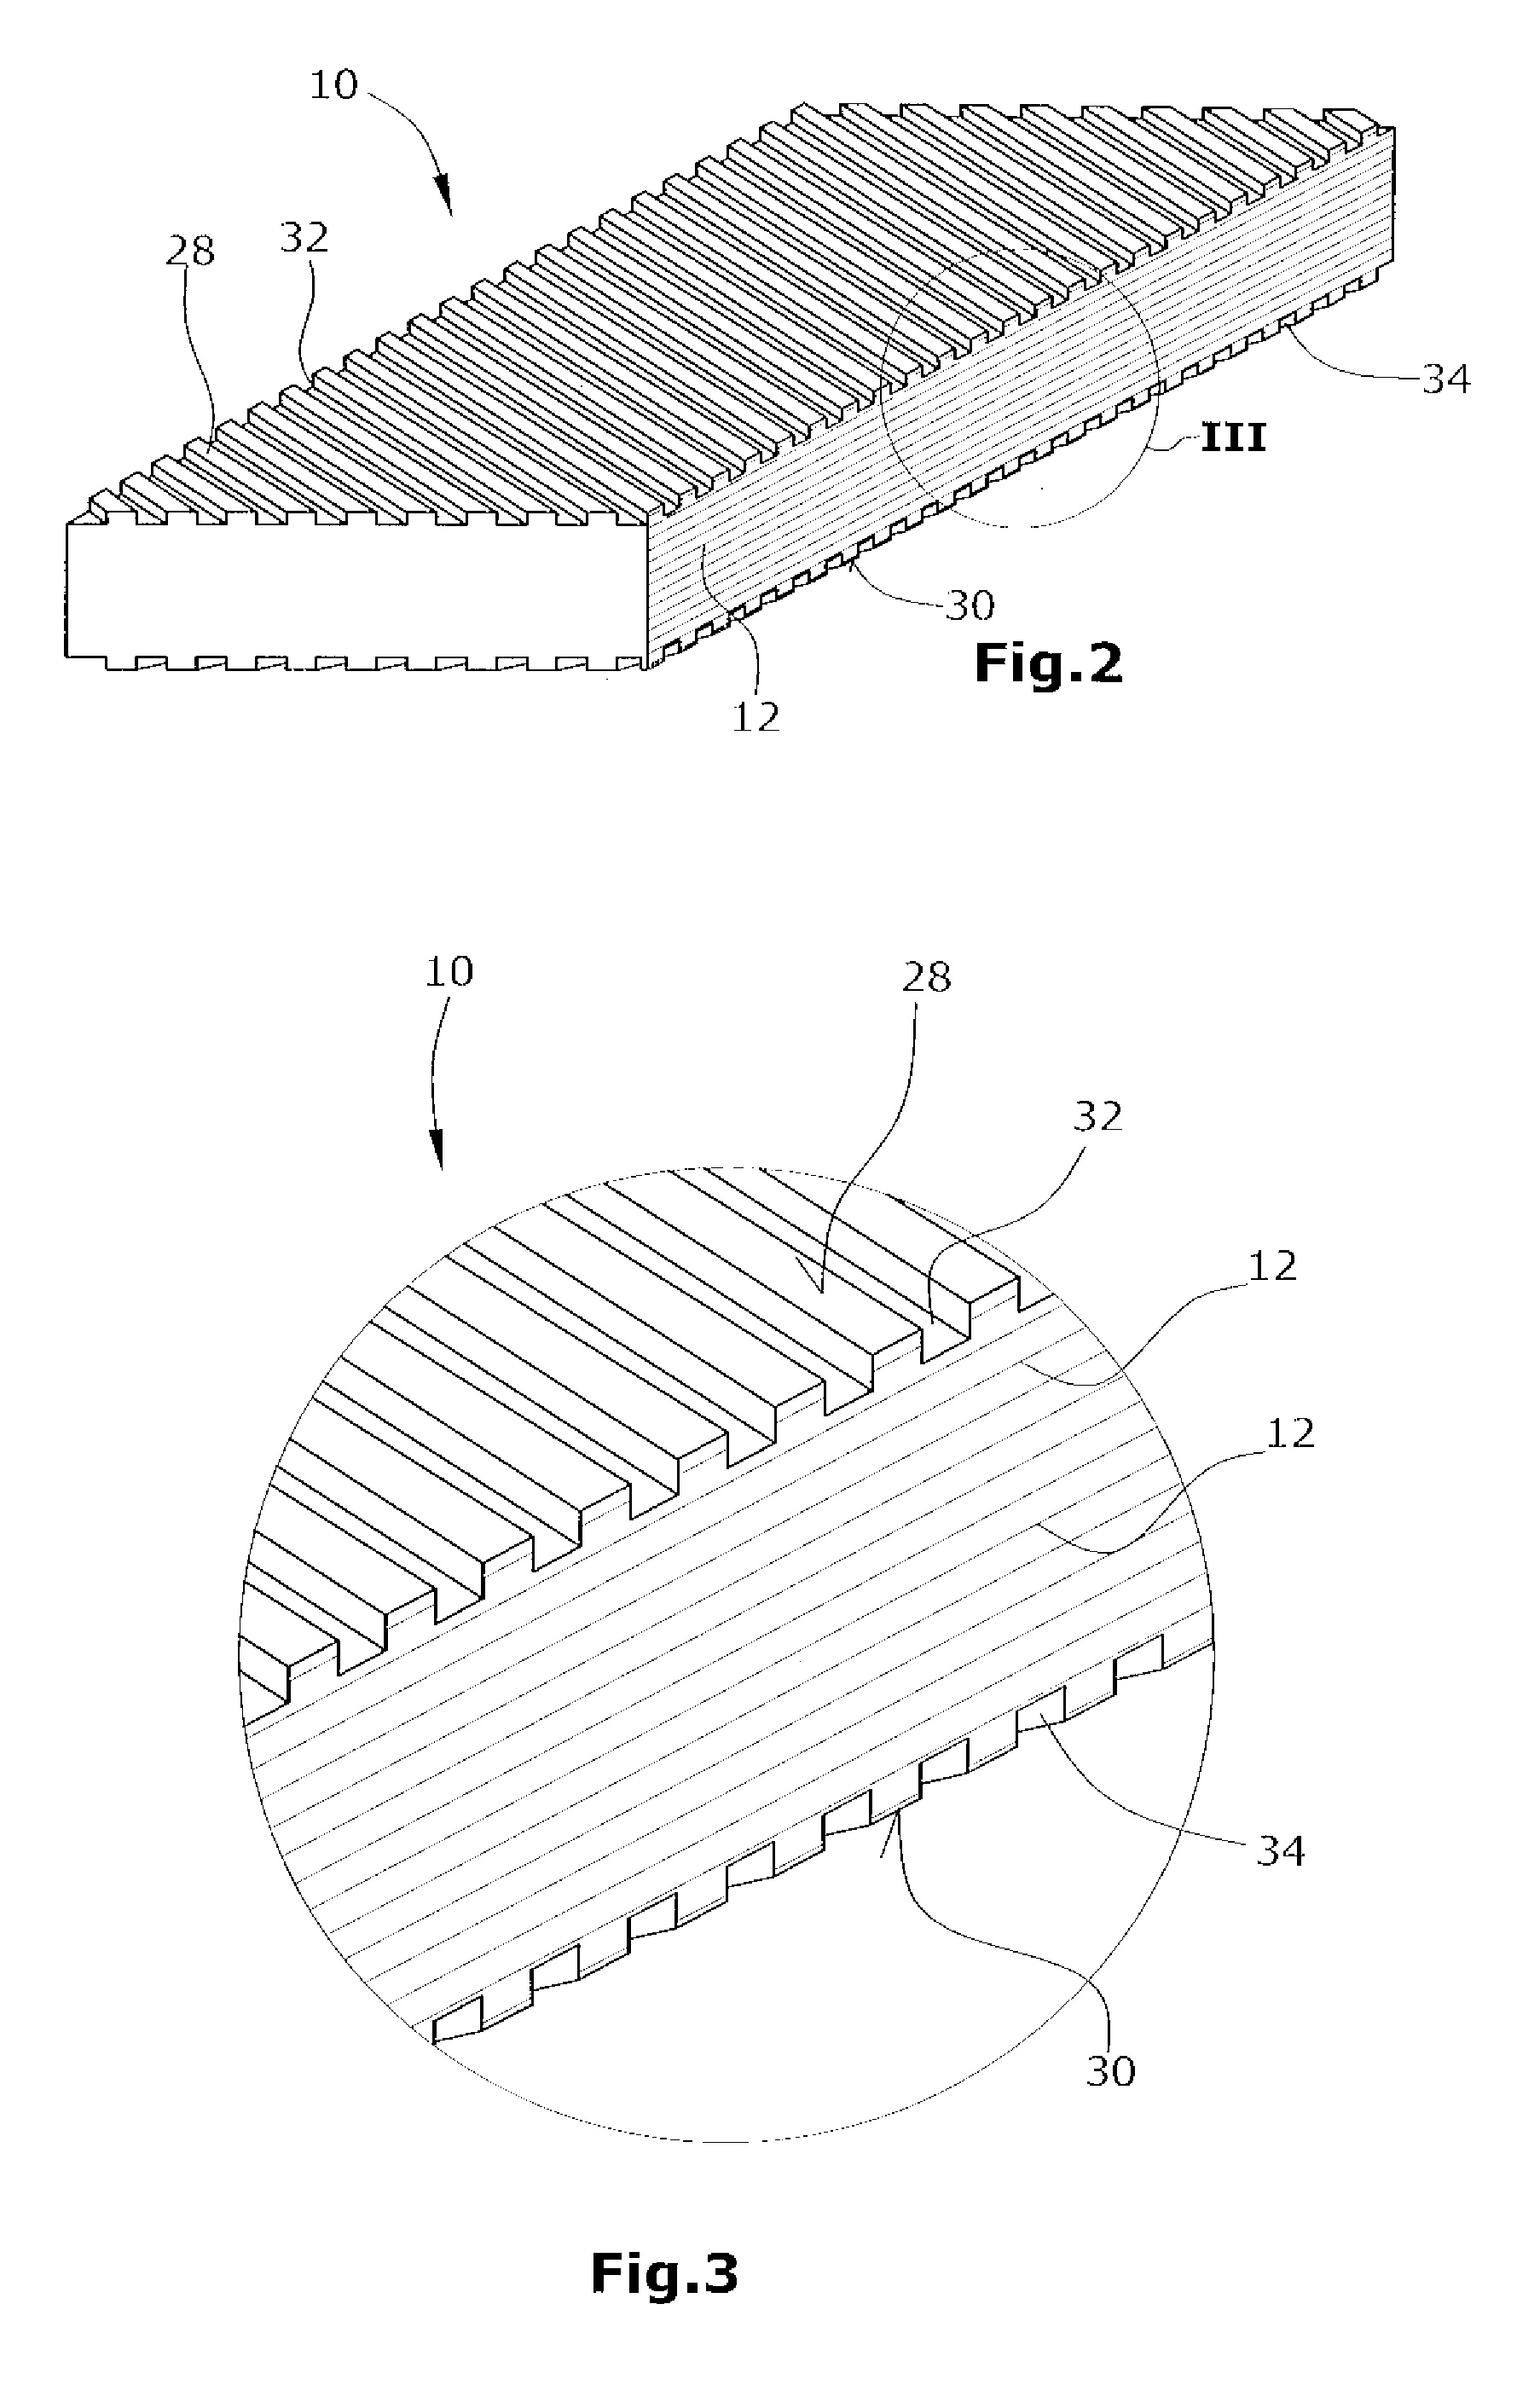 Method For Making A Continuous Laminate, In Particular Suitable As A Spar Cap Or Another Part Of A Wind Energy Turbine Rotor Blade